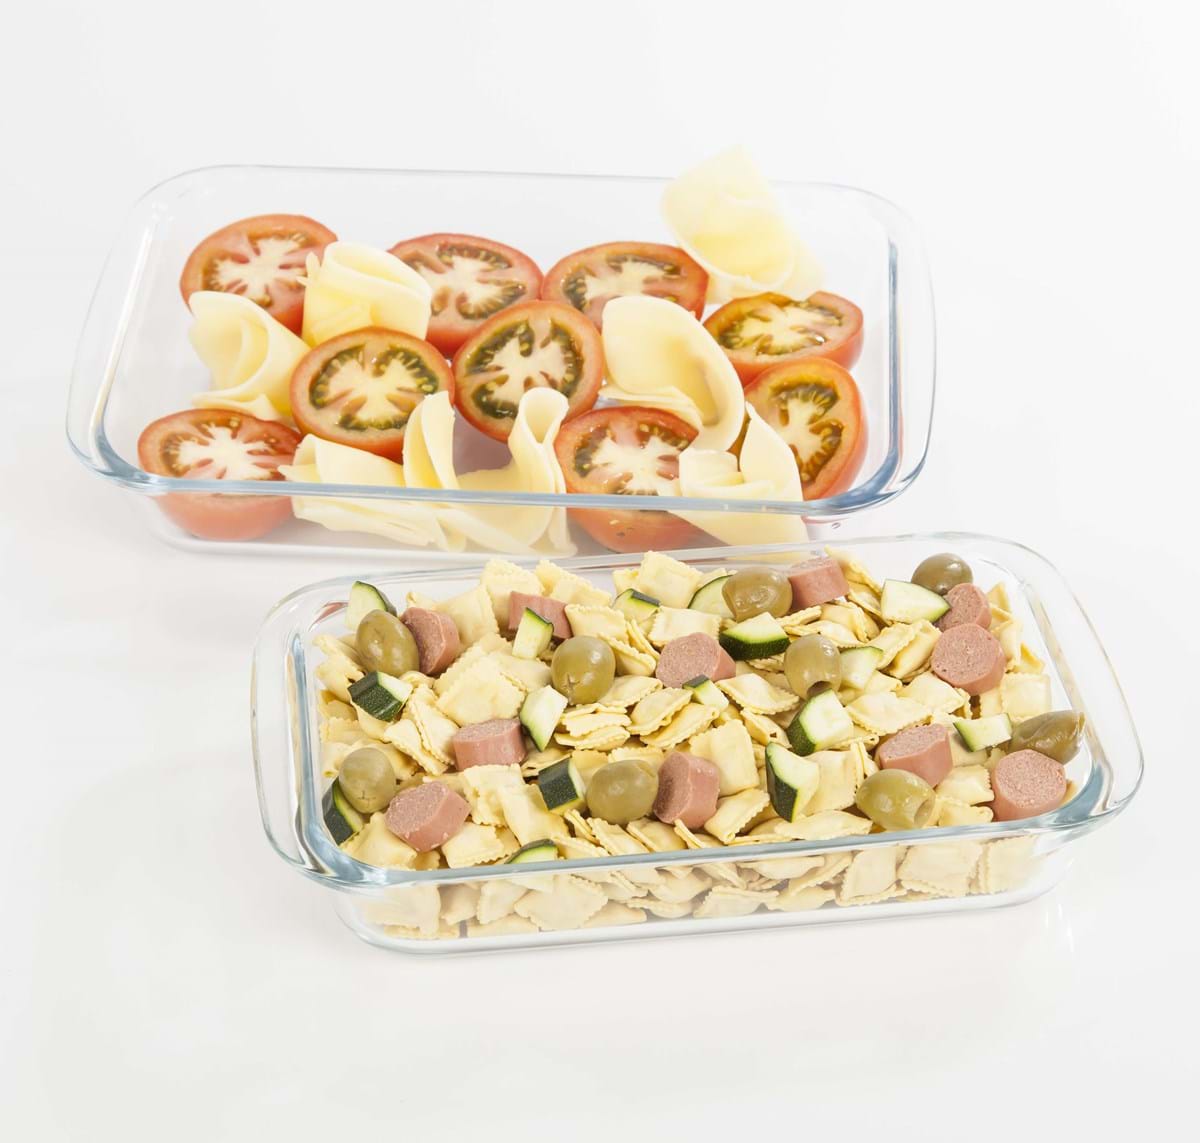 glass pyrex dishes with casseroles in them